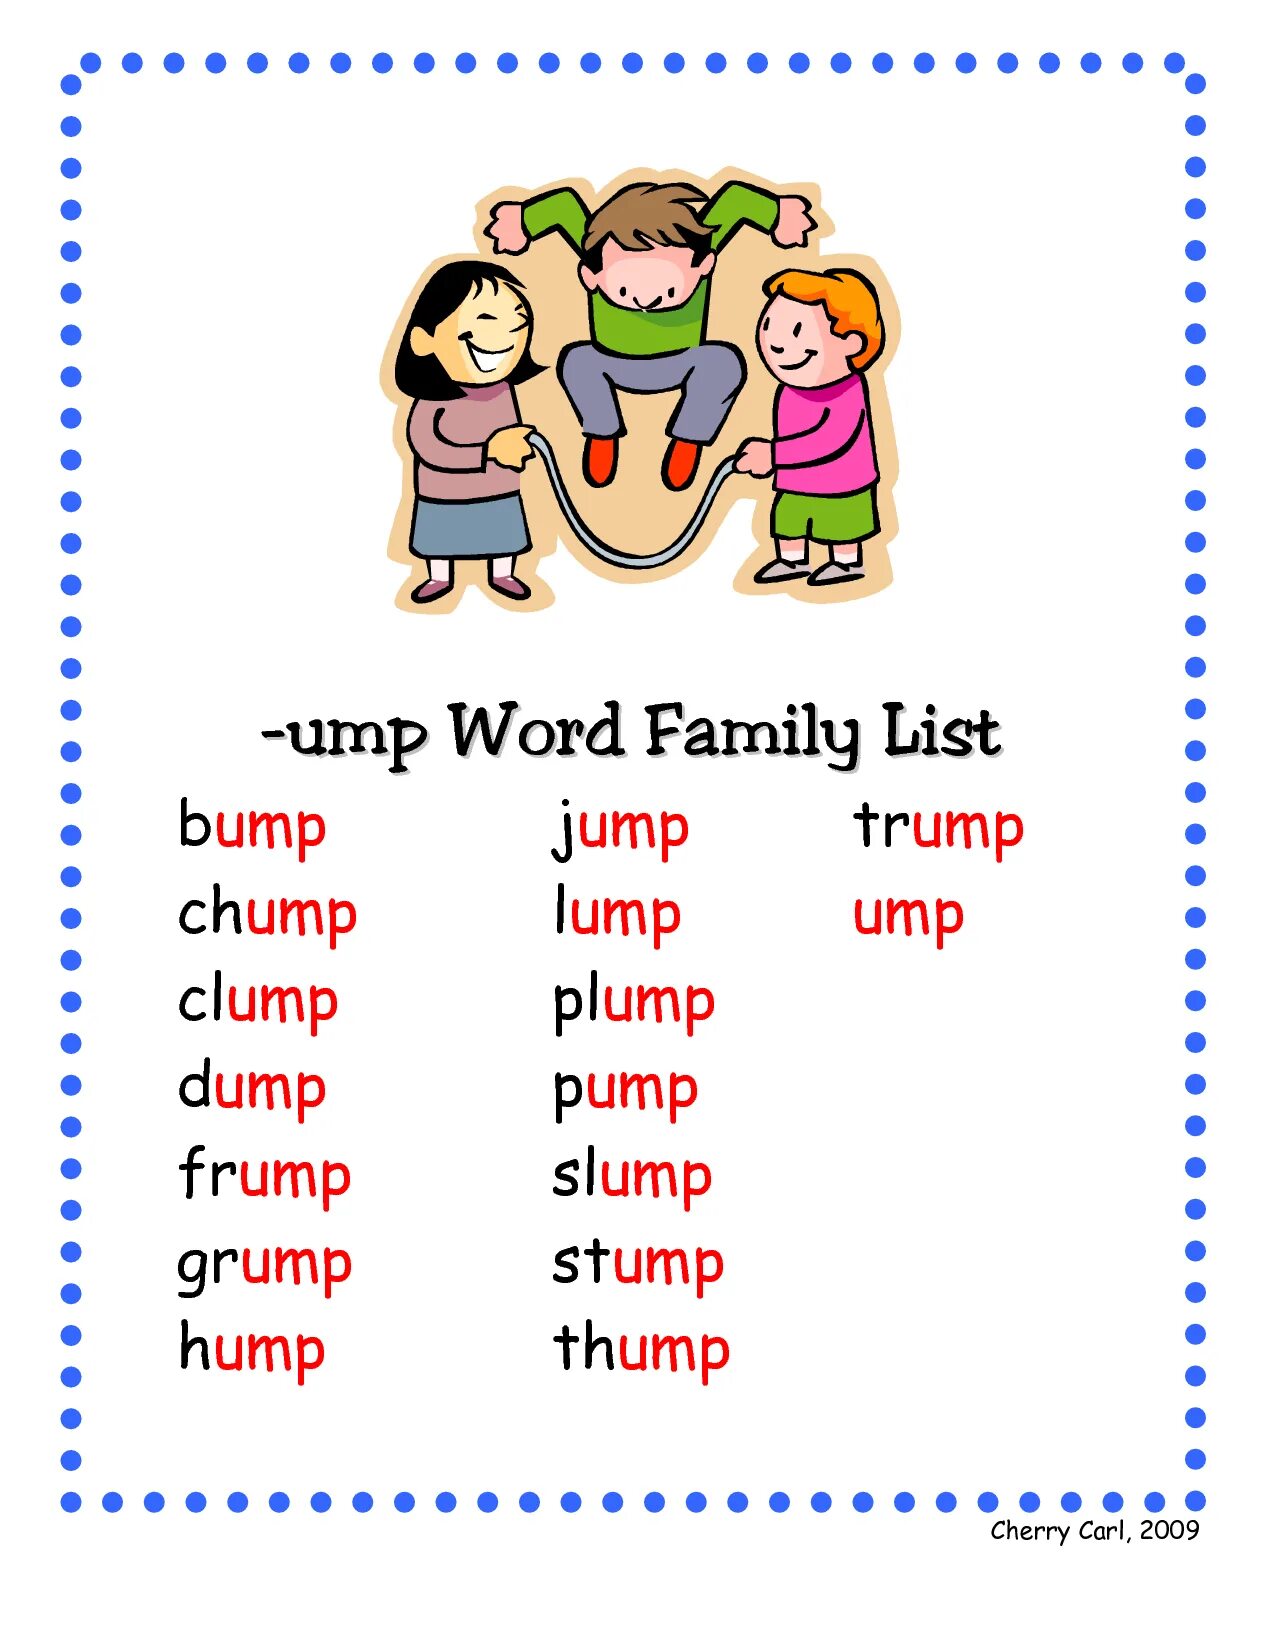 Make word family. Word Families в английском языке. Word Family list. Un Word famiky. Чтение английский Family Words.